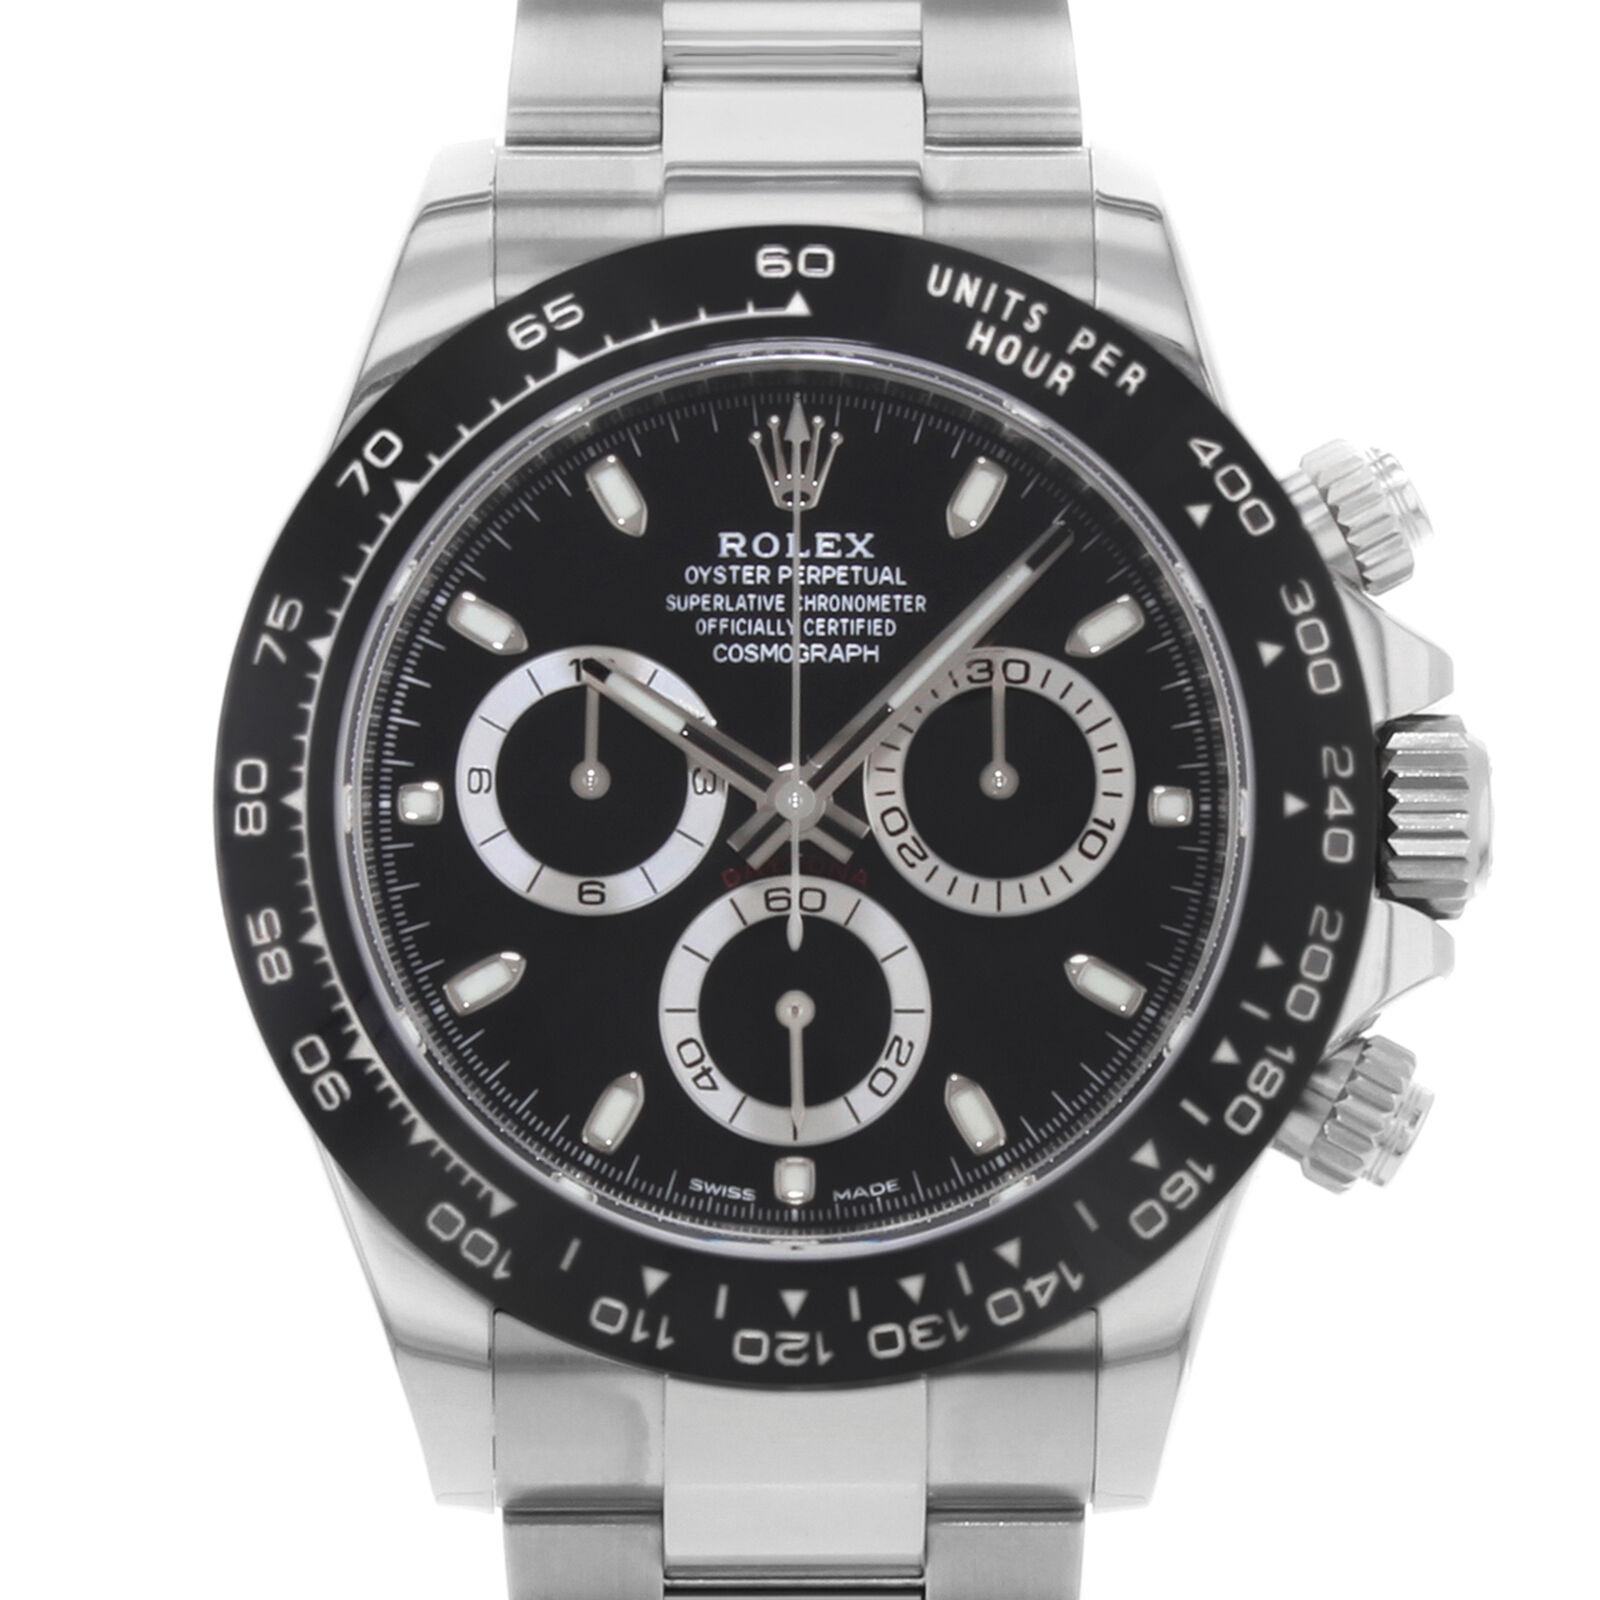 This pre-owned Rolex Daytona 116500LN is a beautiful men's timepiece that is powered by an automatic movement which is cased in a stainless steel case. It has a round shape face, chronograph, small seconds subdial, tachymeter dial and has hand